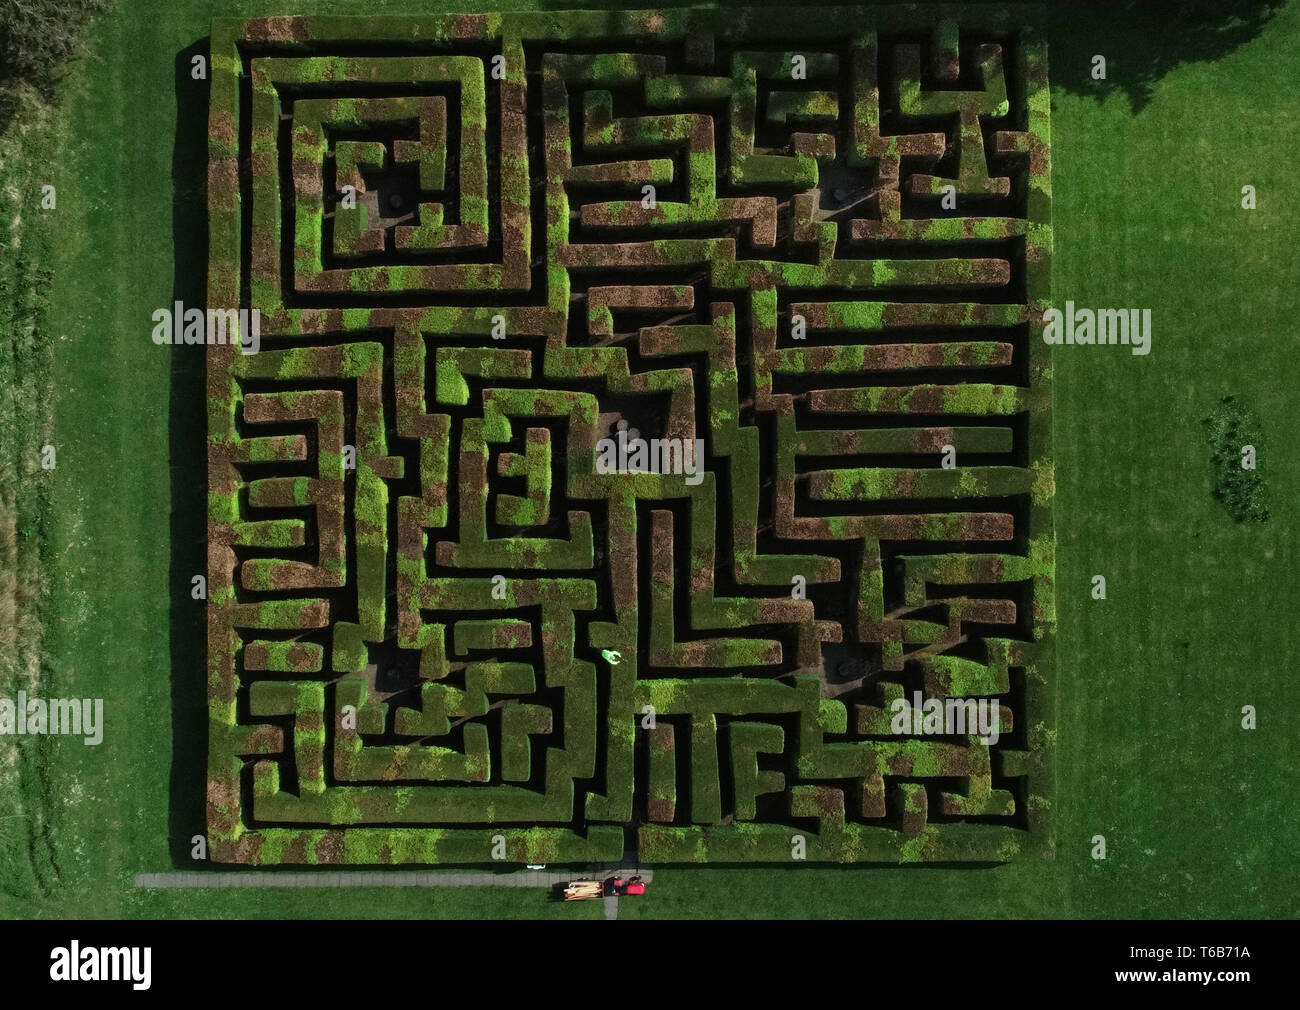 Gardner Eric Drennon give the maze at Tranquair House in Peeblessshire, the Scotland's oldest inhabited House. Stock Photo